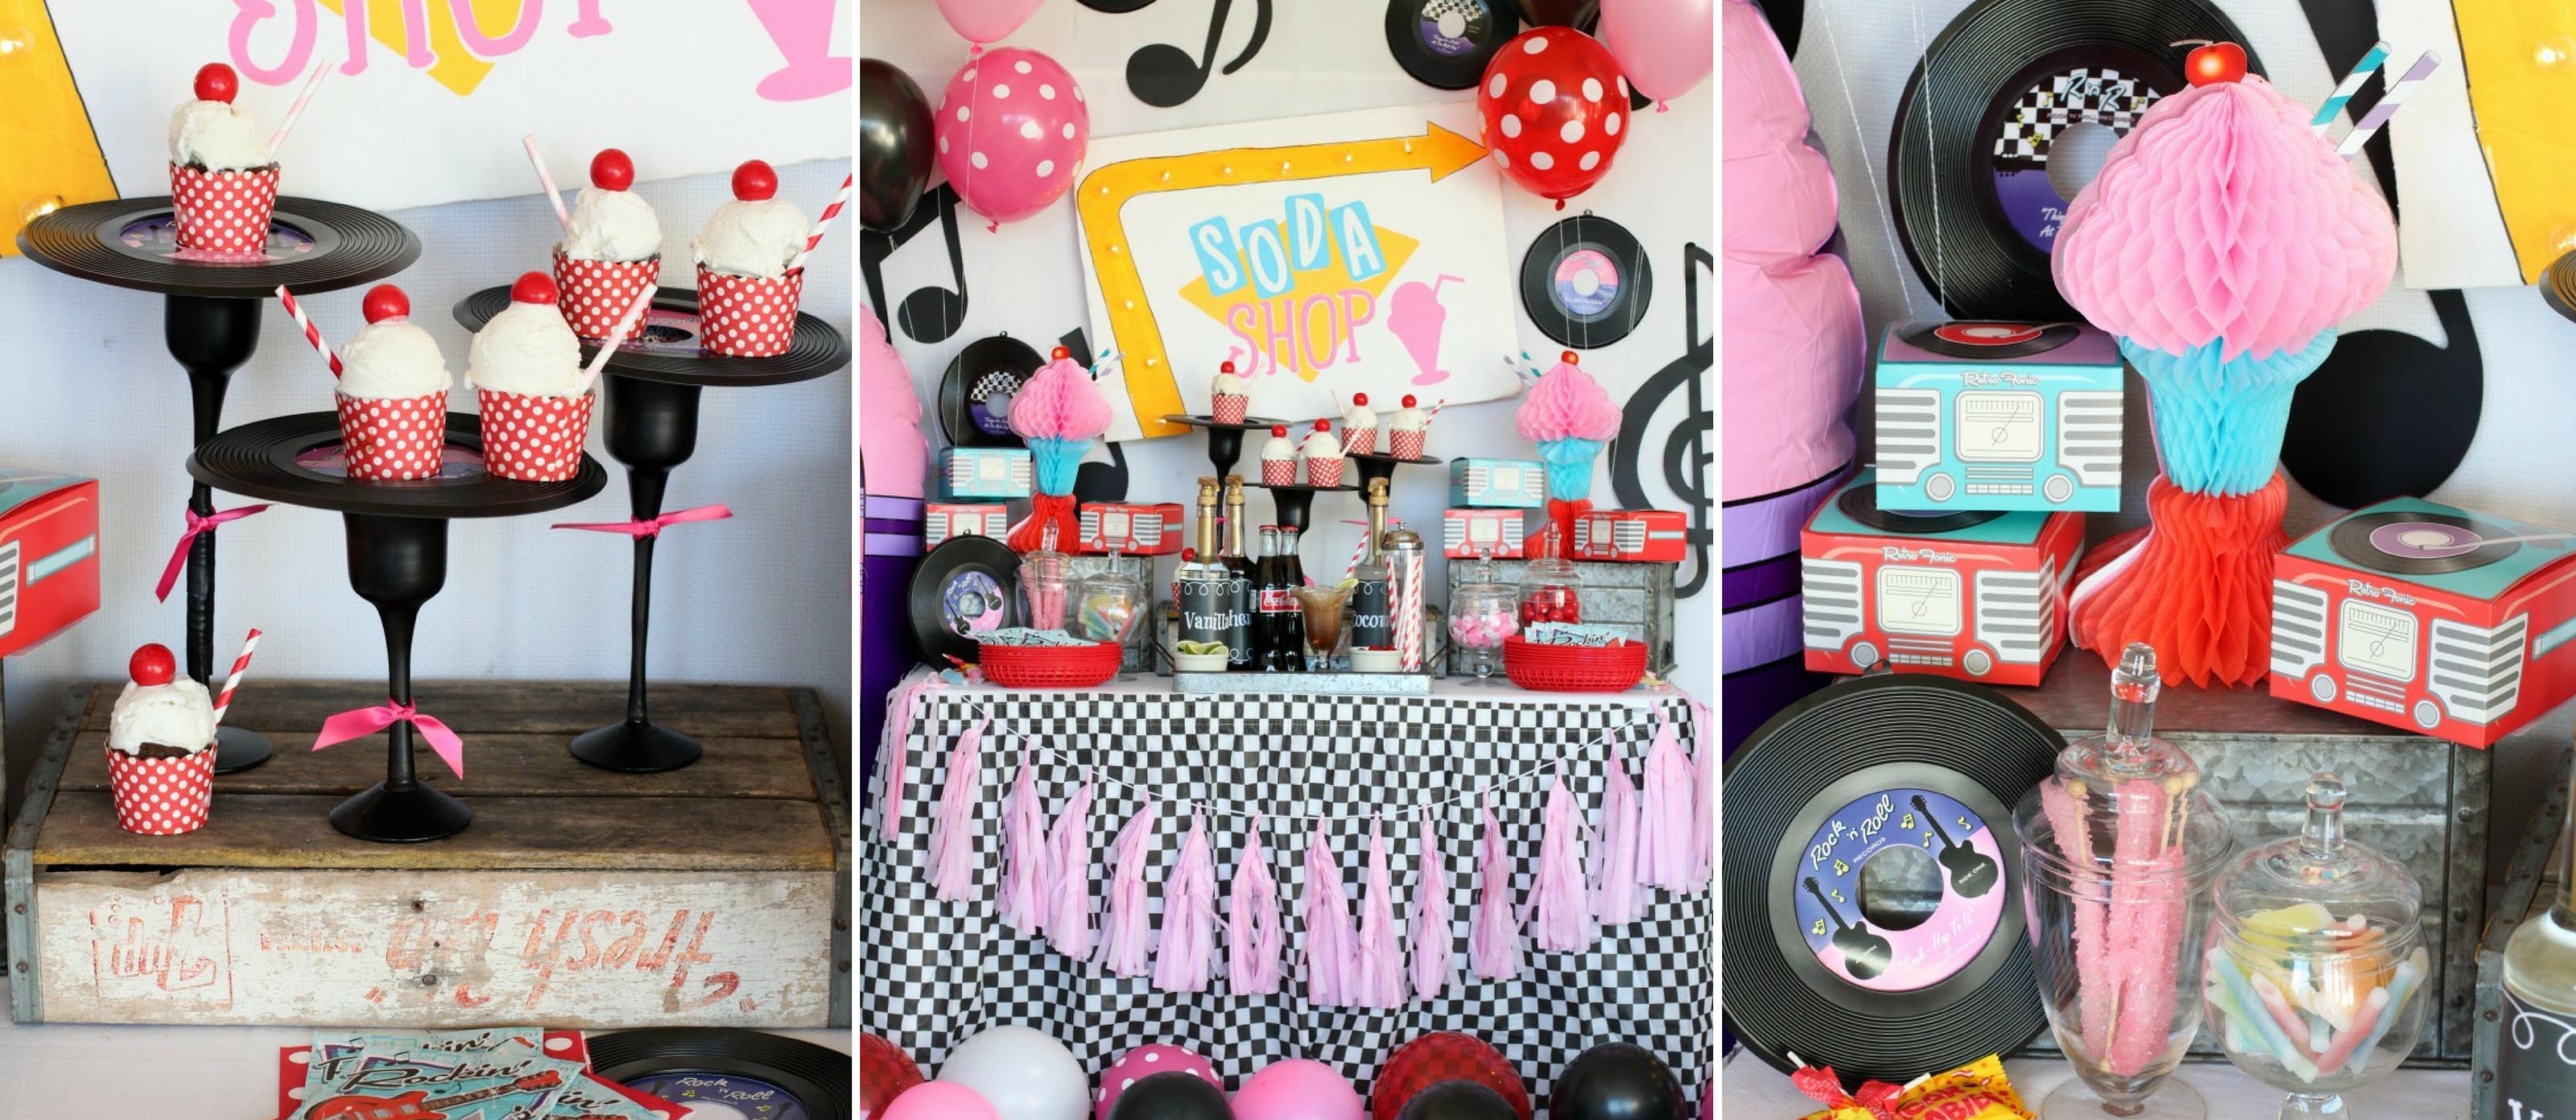 Daughter Sock Hop Valentine S Day Party